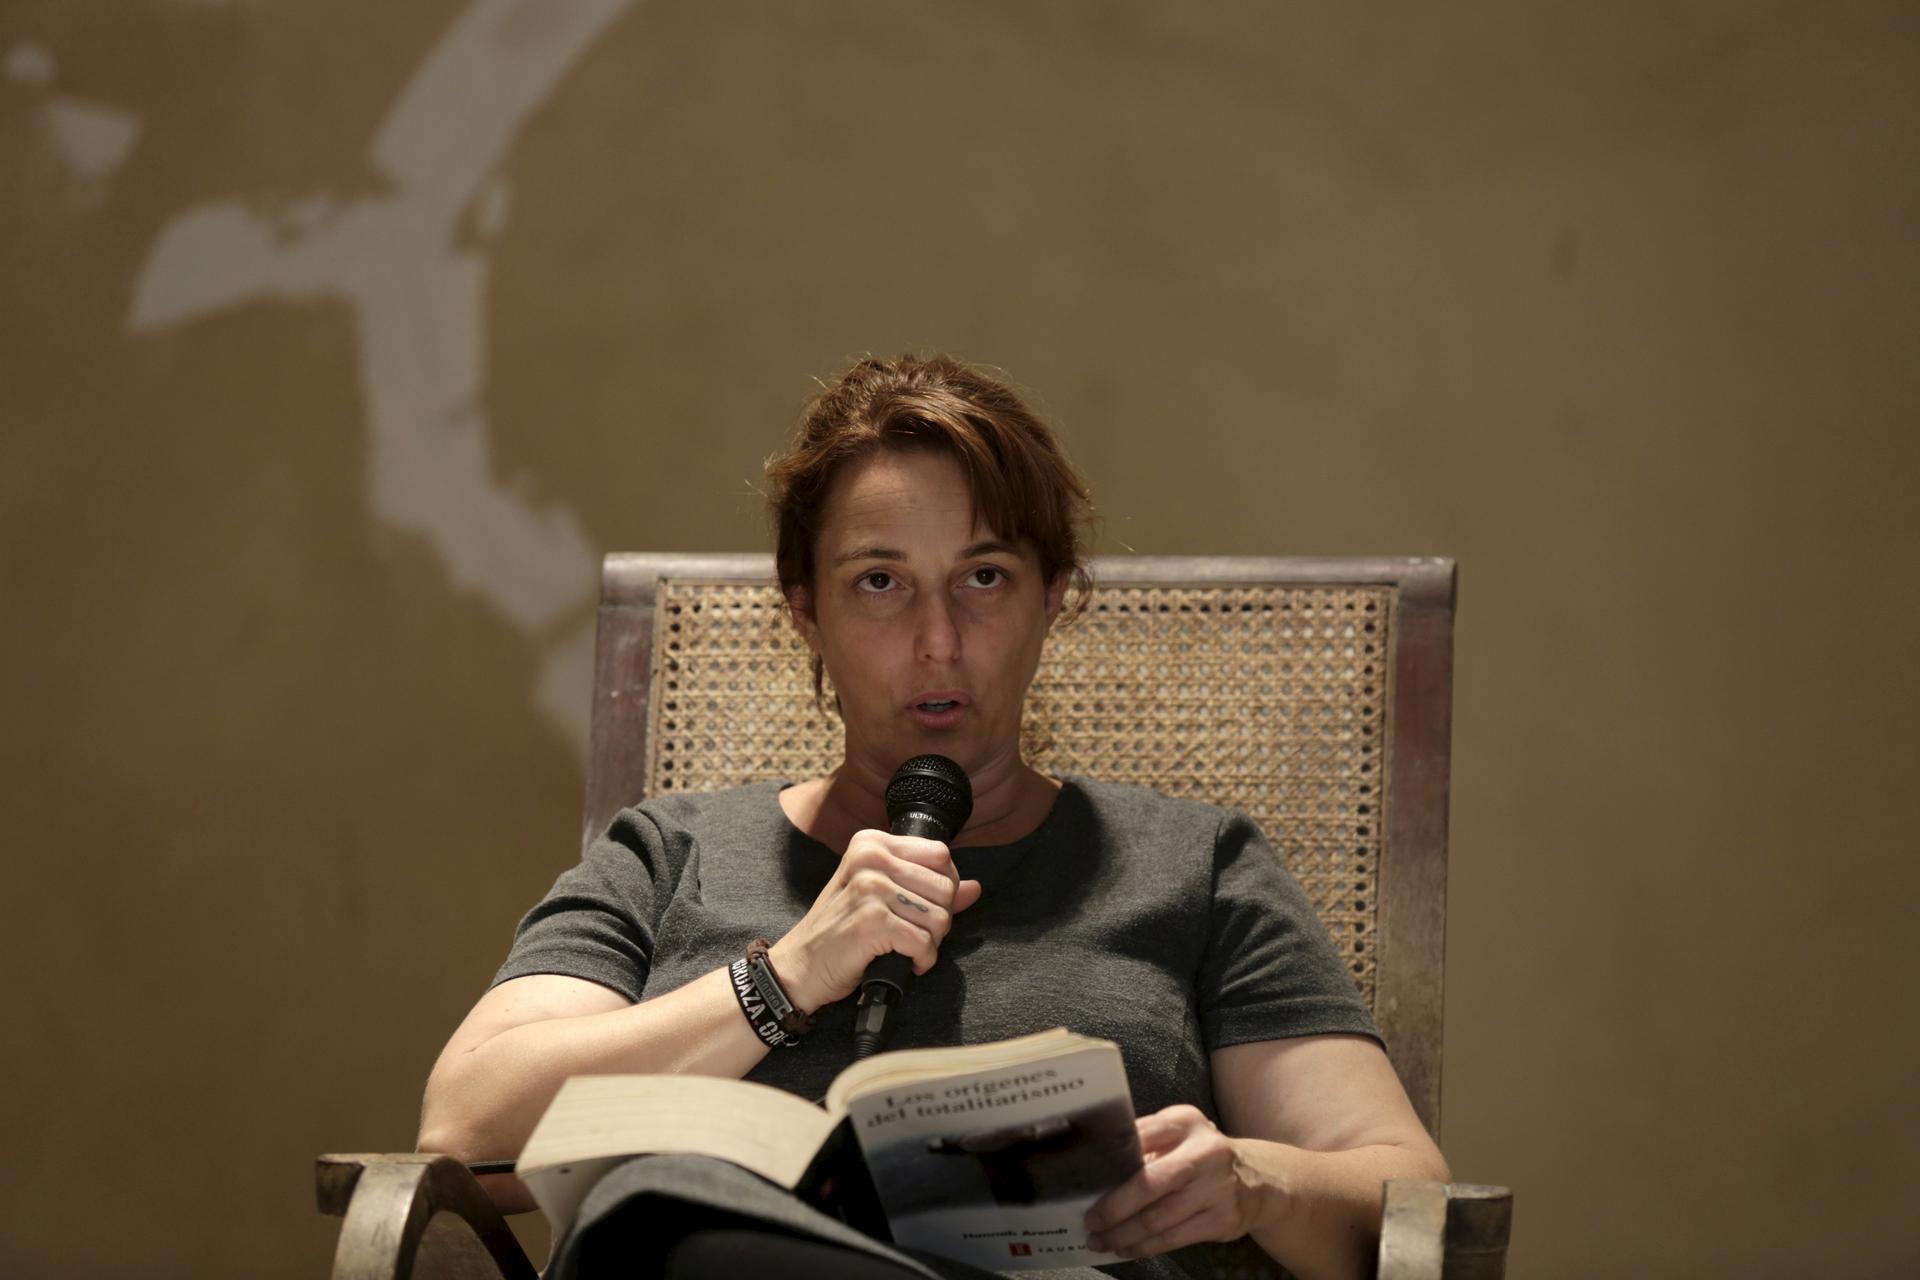 Cuban artist Tania Bruguera reads from Hannah Arendt's book "The Origins of Totalitarianism" as part of a 100-hour collective reading in Havana May 20, 2015.